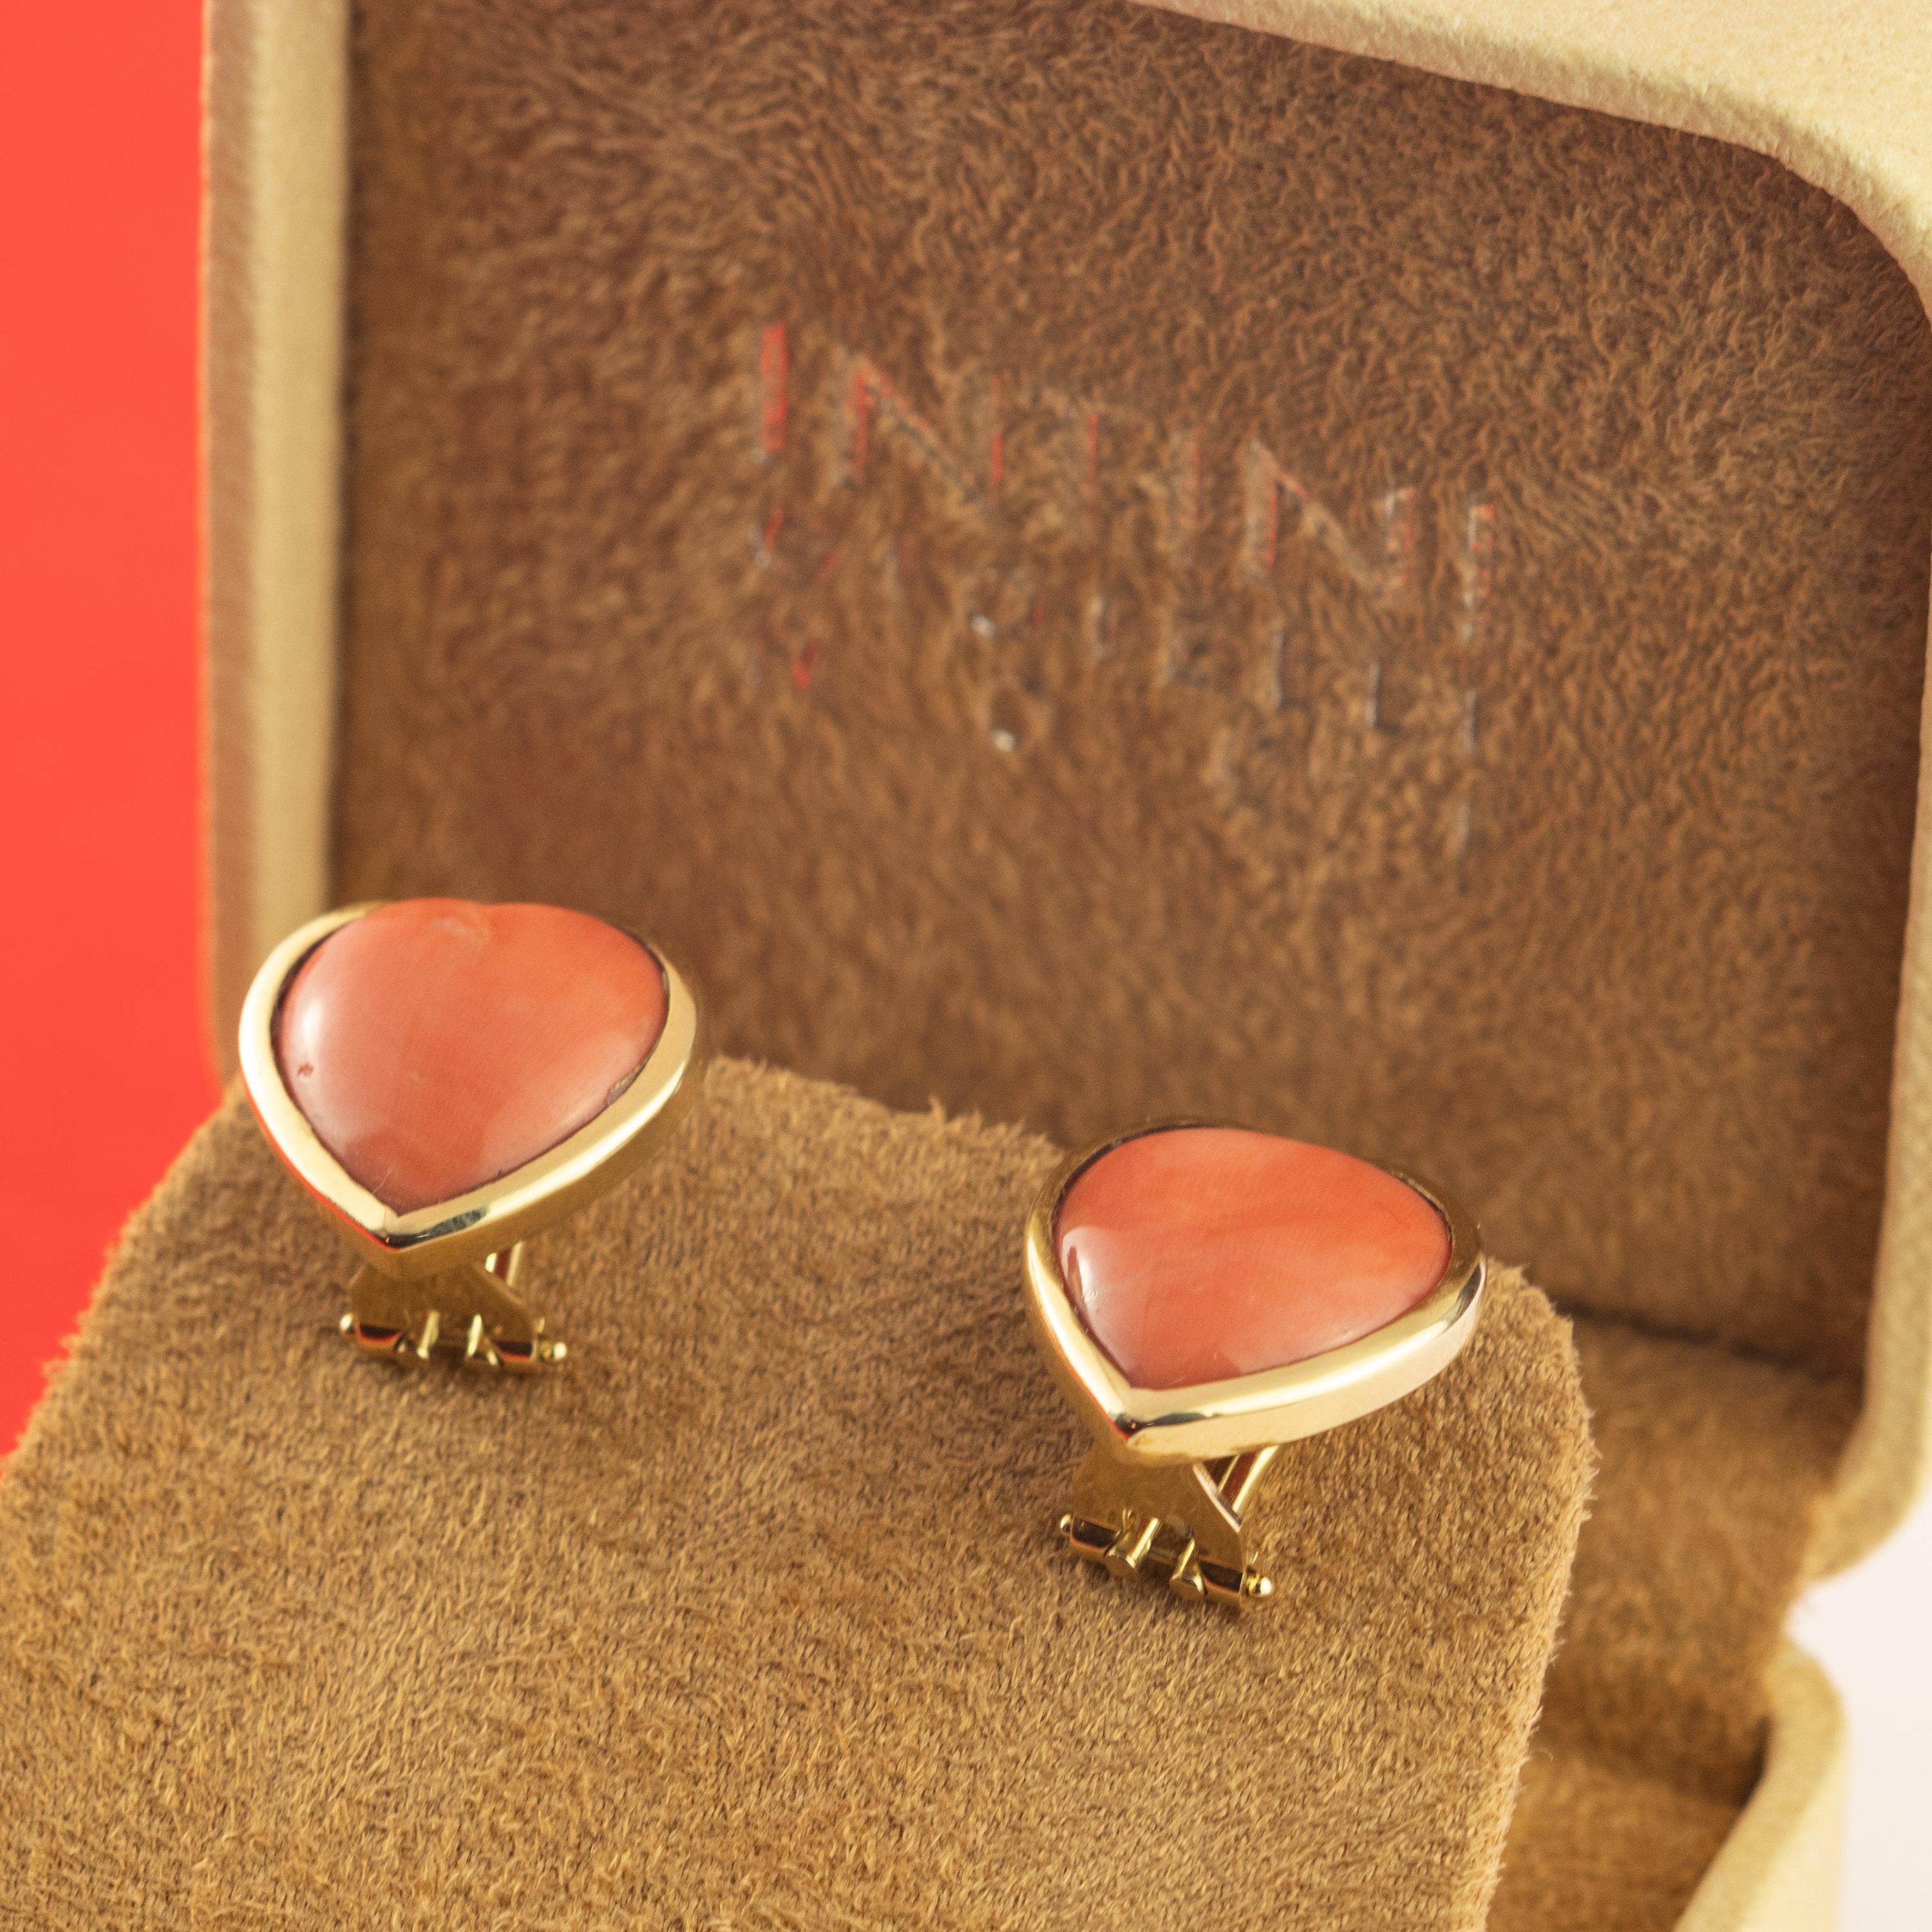 Sweet and extraordinary stud earrings modeled in a heart and bold shape of salmon natural coral surrounded with 18 karat yellow gold that creates a unique and romantic clip on design. Italian craftsmanship adorning the perfect stud earrings for a